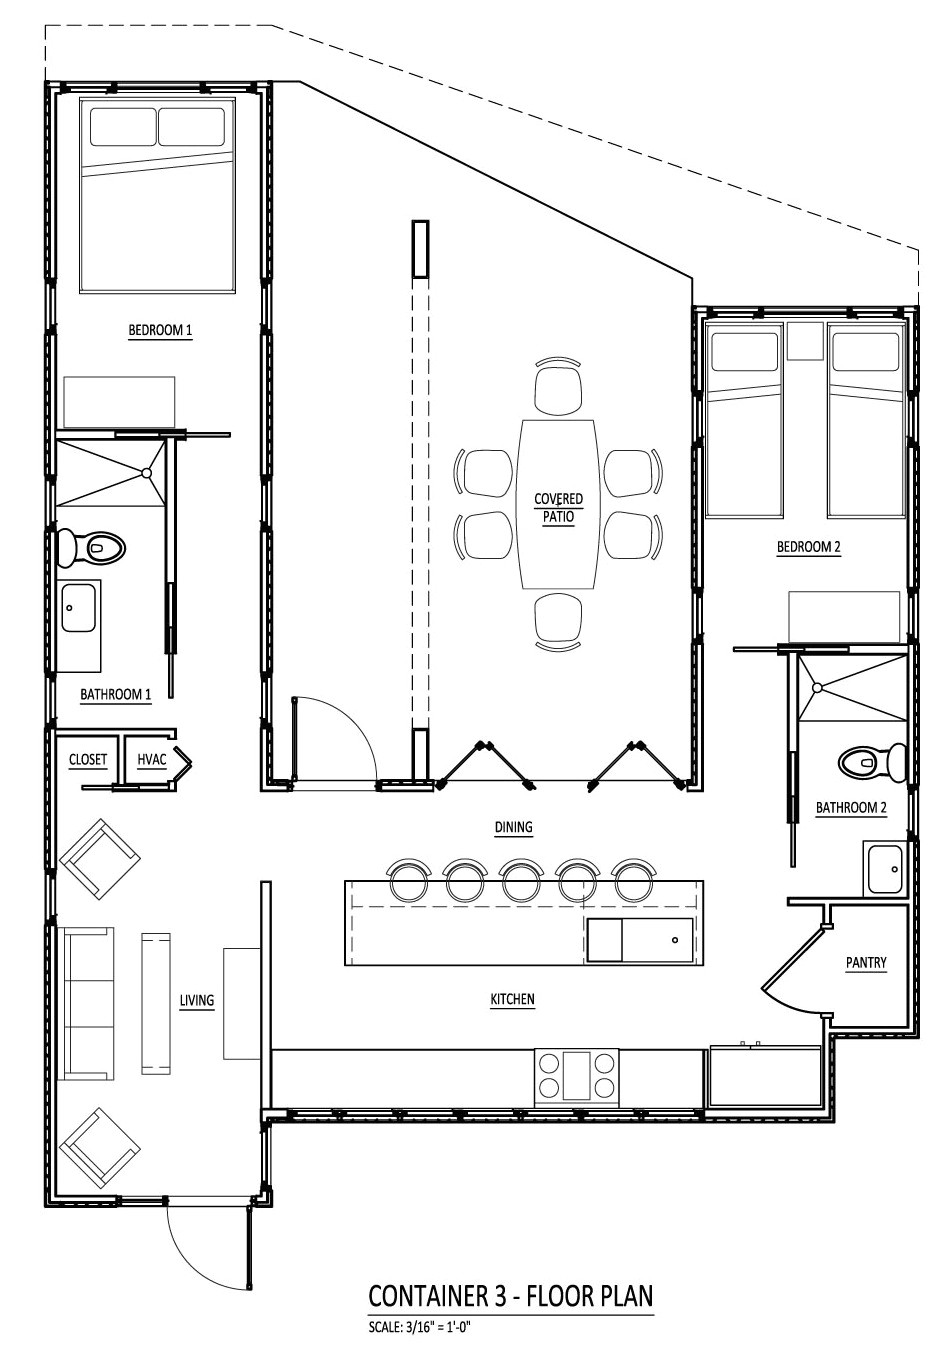 Floor Plans for Shipping Container Homes Sense and Simplicity Shipping Container Homes 6